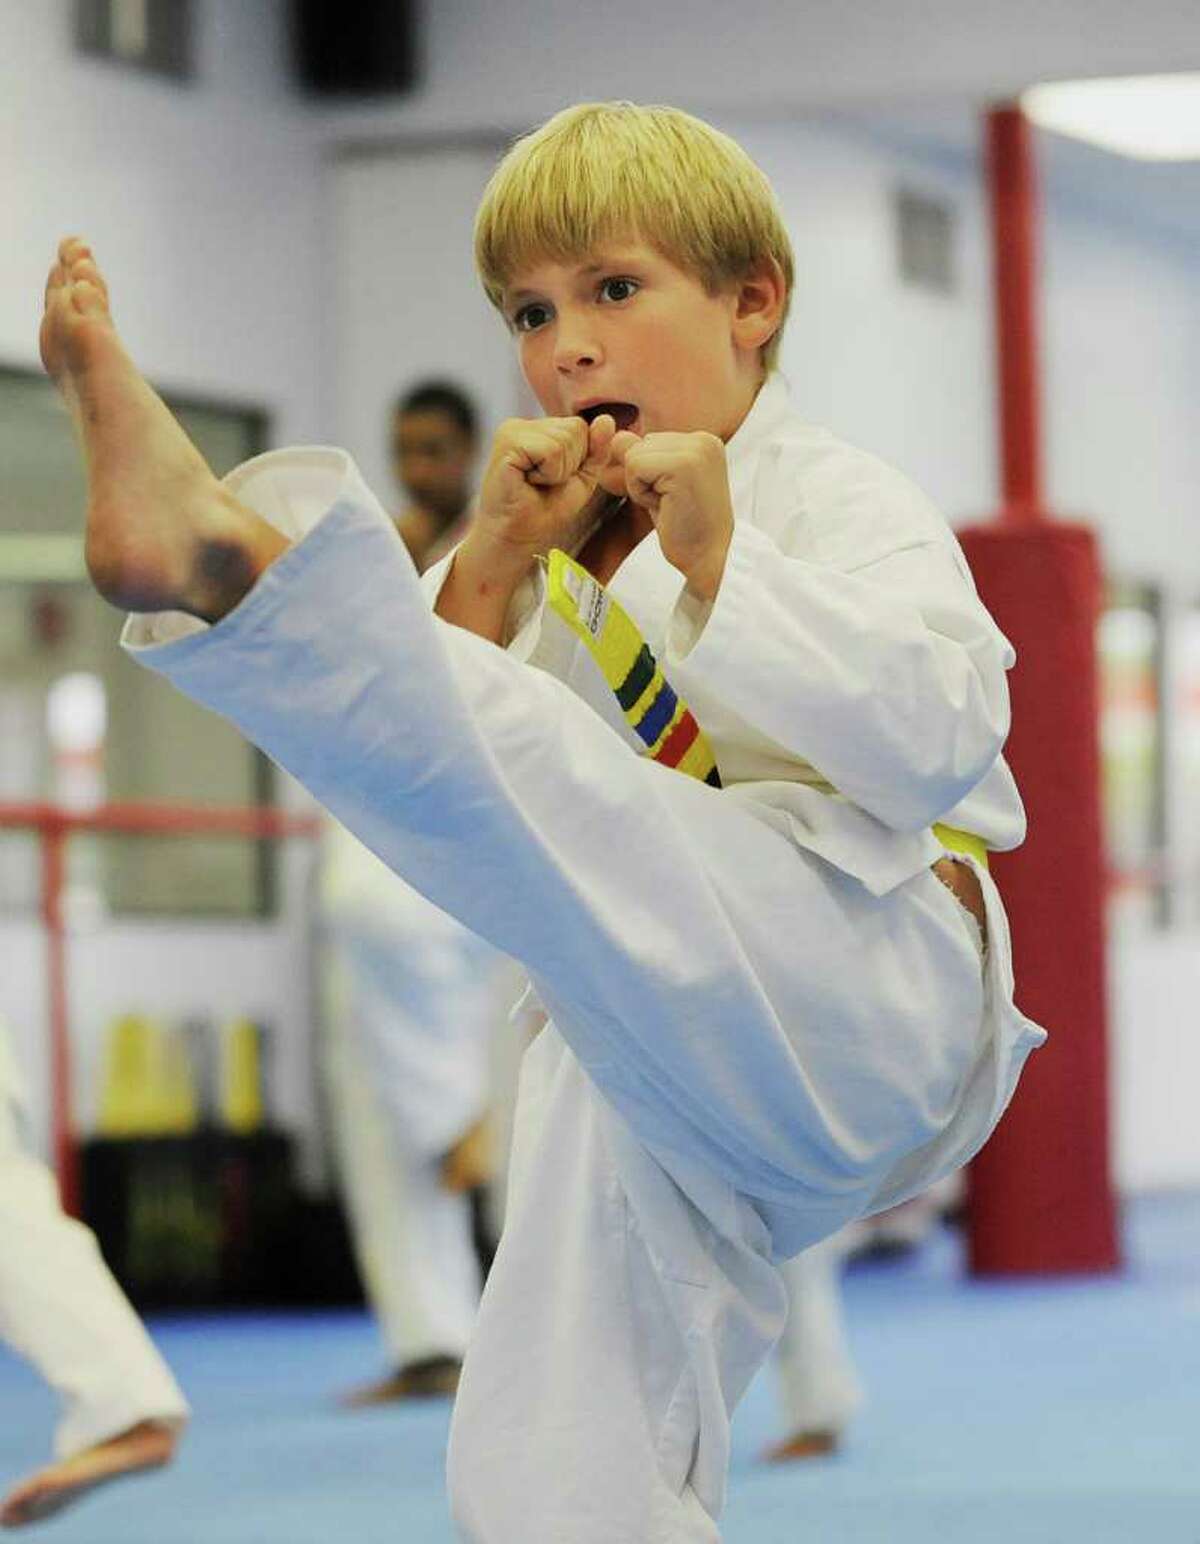 Martial arts classes let your kids blow off steam - safely